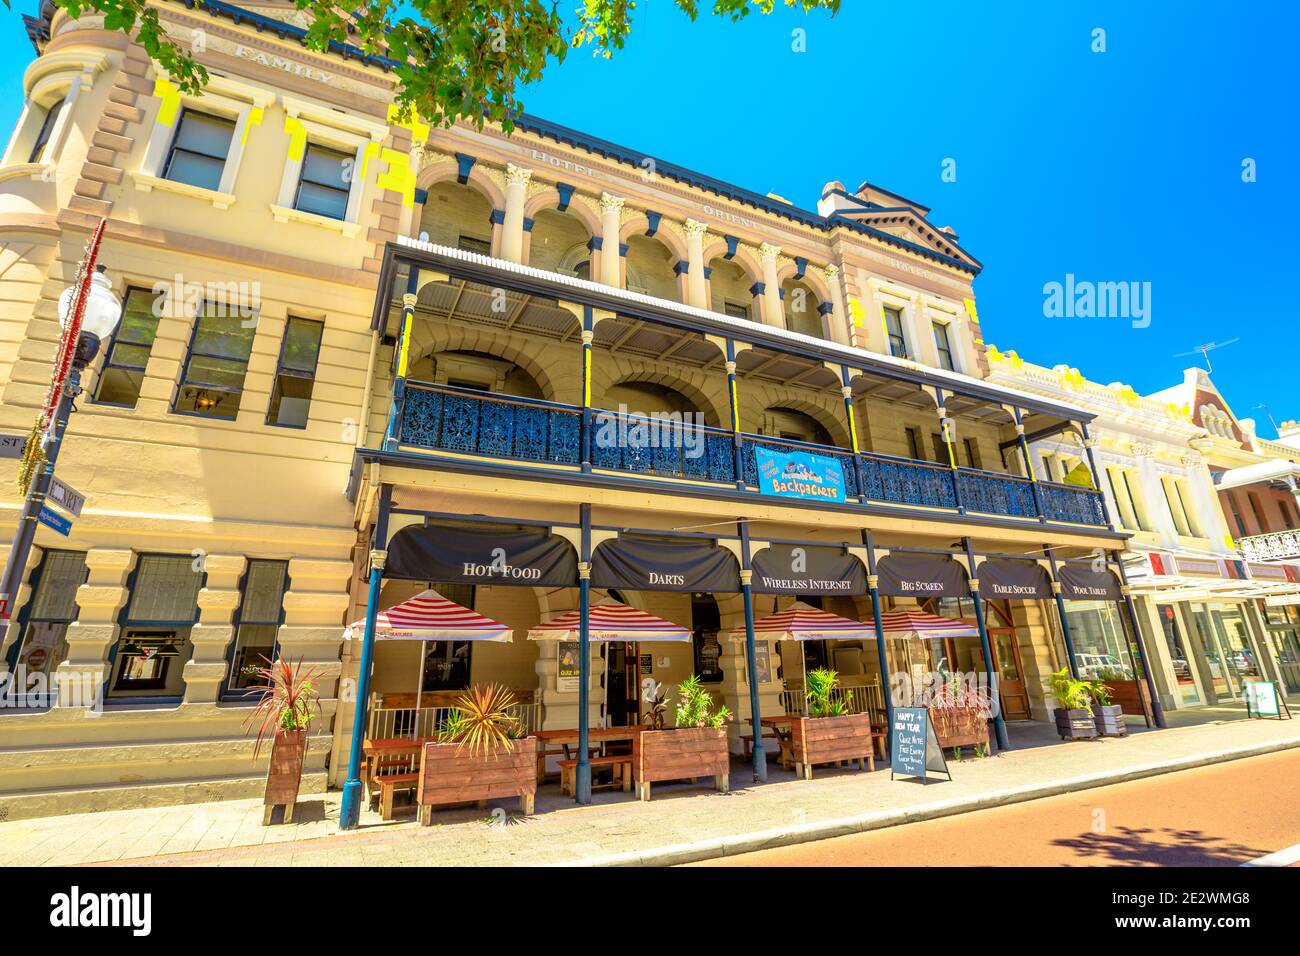 Fremantle, Western Australia - Jan 2, 2018: Fremantle West End Heritage area, the port of Perth is an area popular for colonial and historical Stock Photo